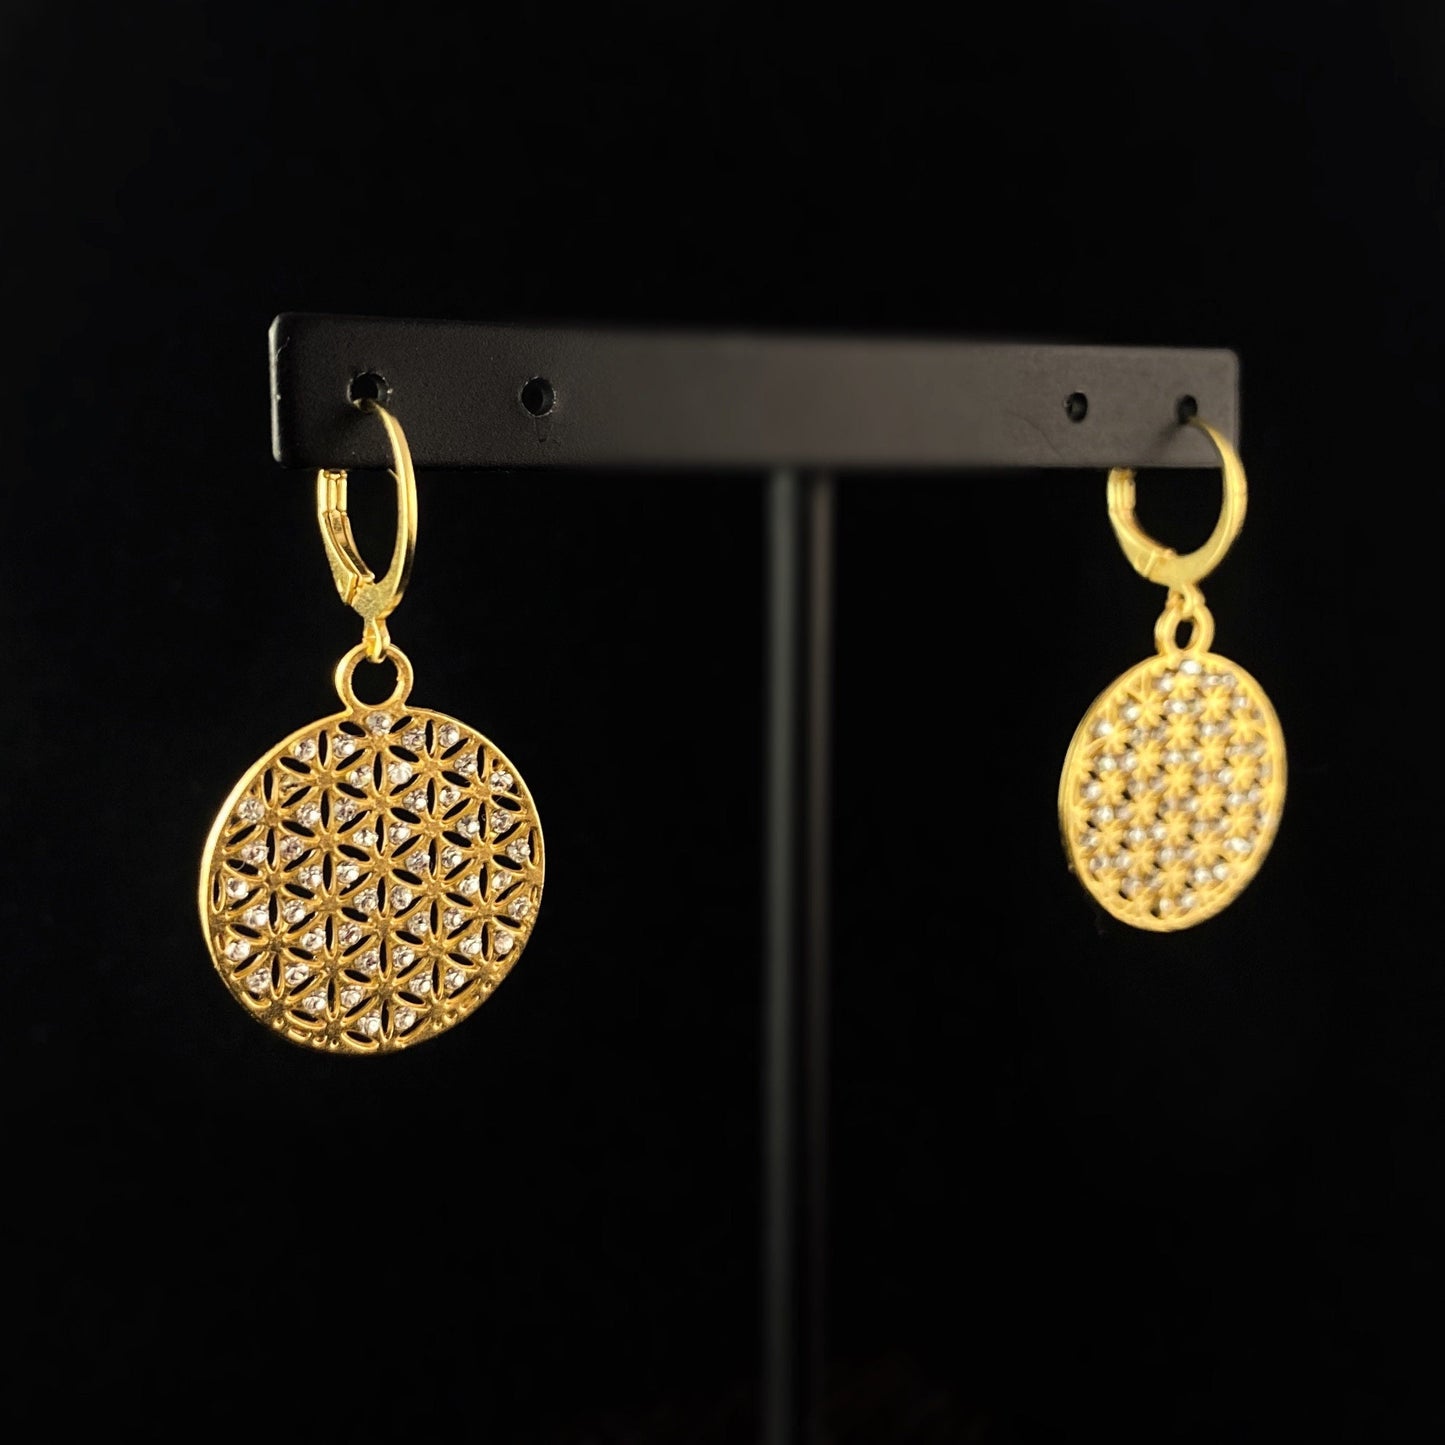 Gold Lattice with Small Swarovski Crystals Drop Earrings - La Vie Parisienne by Catherine Popesco